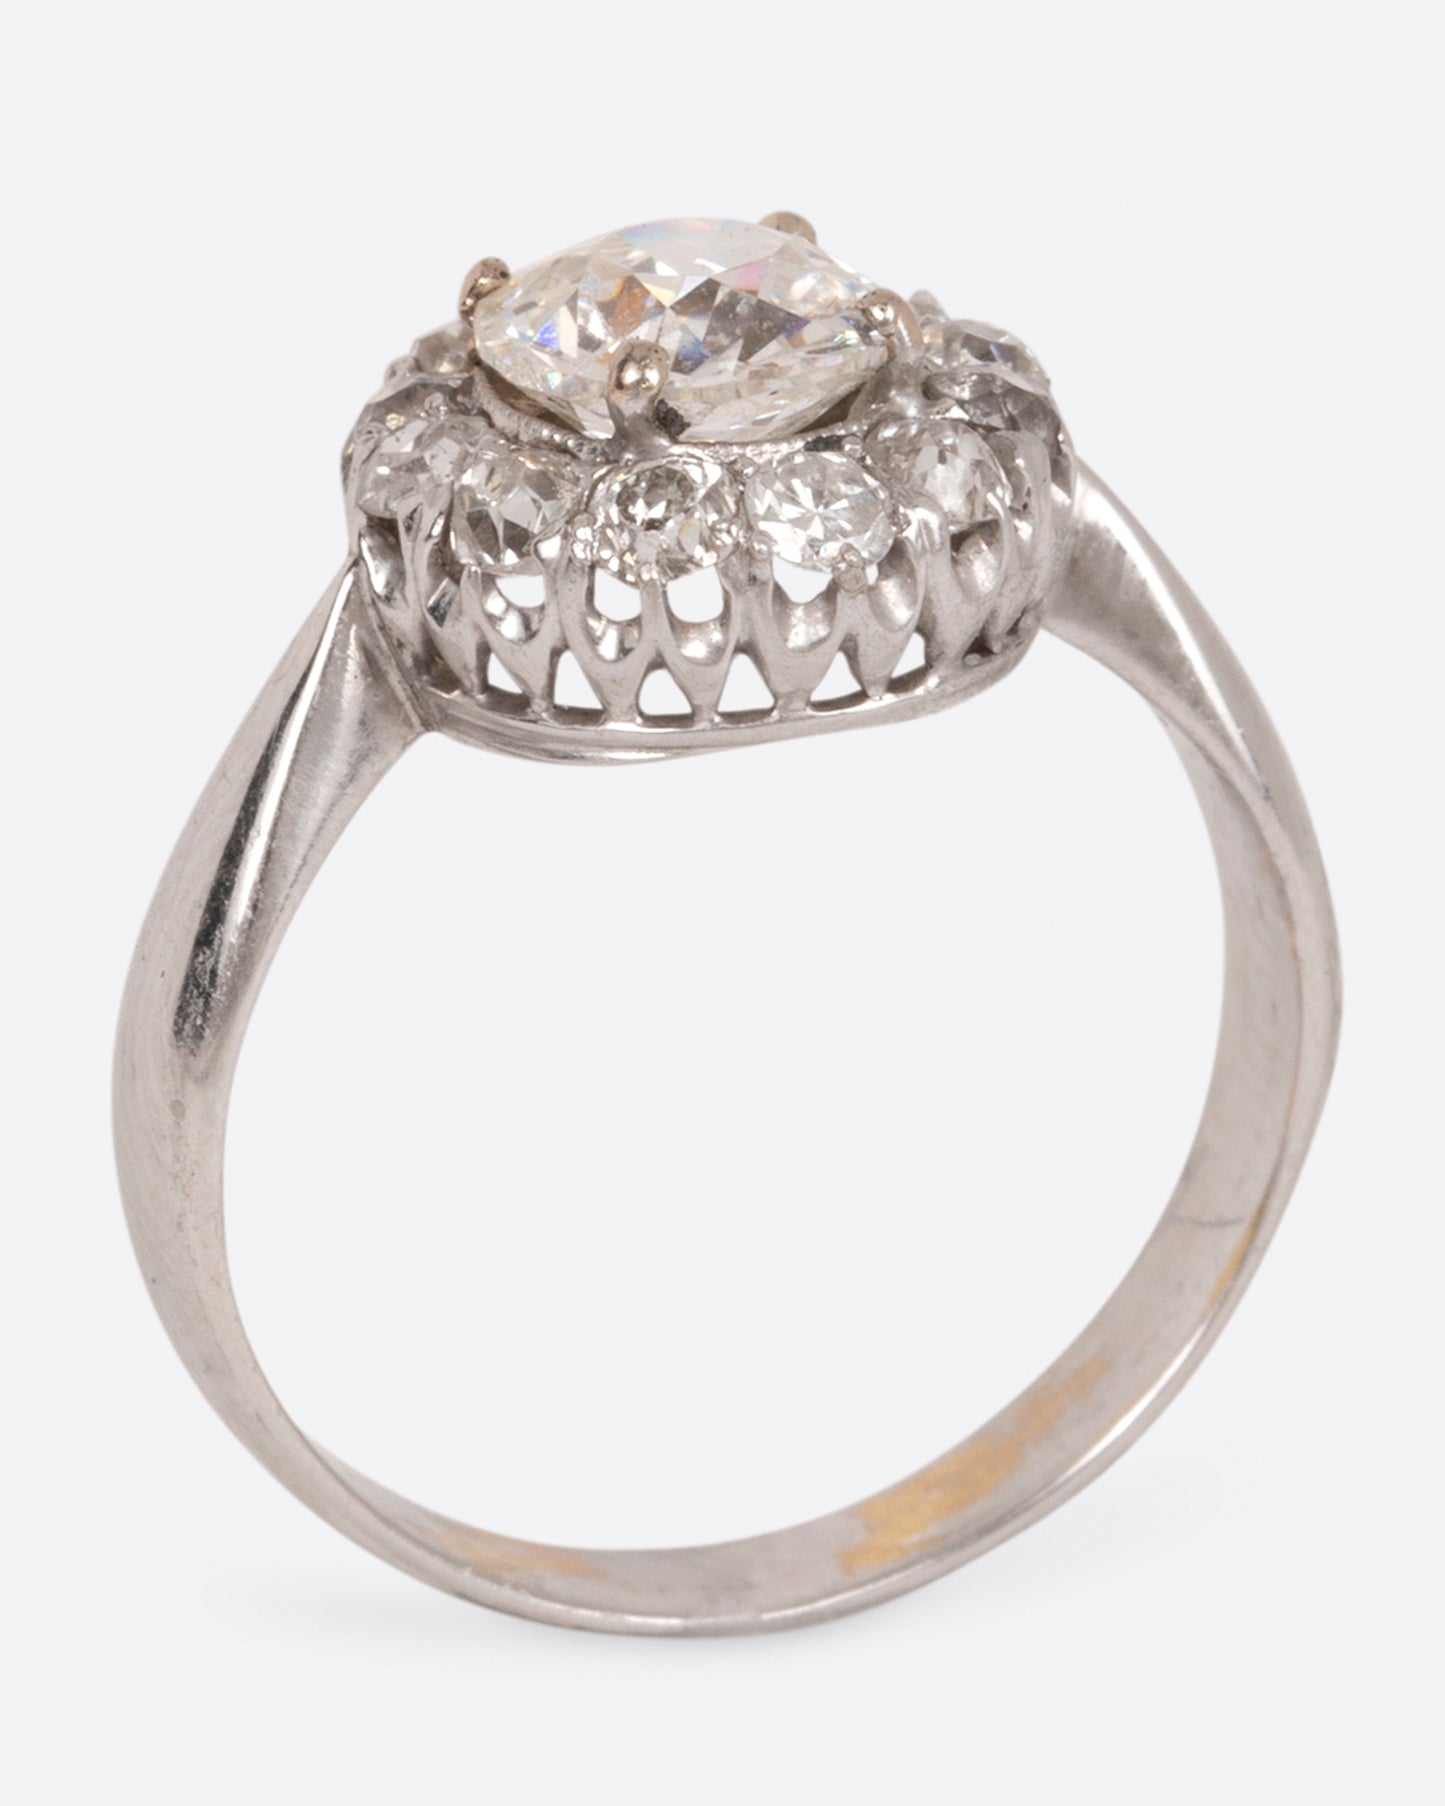 A white gold ring with a tapered band and a flower-shaped cluster of diamonds, shown standing.